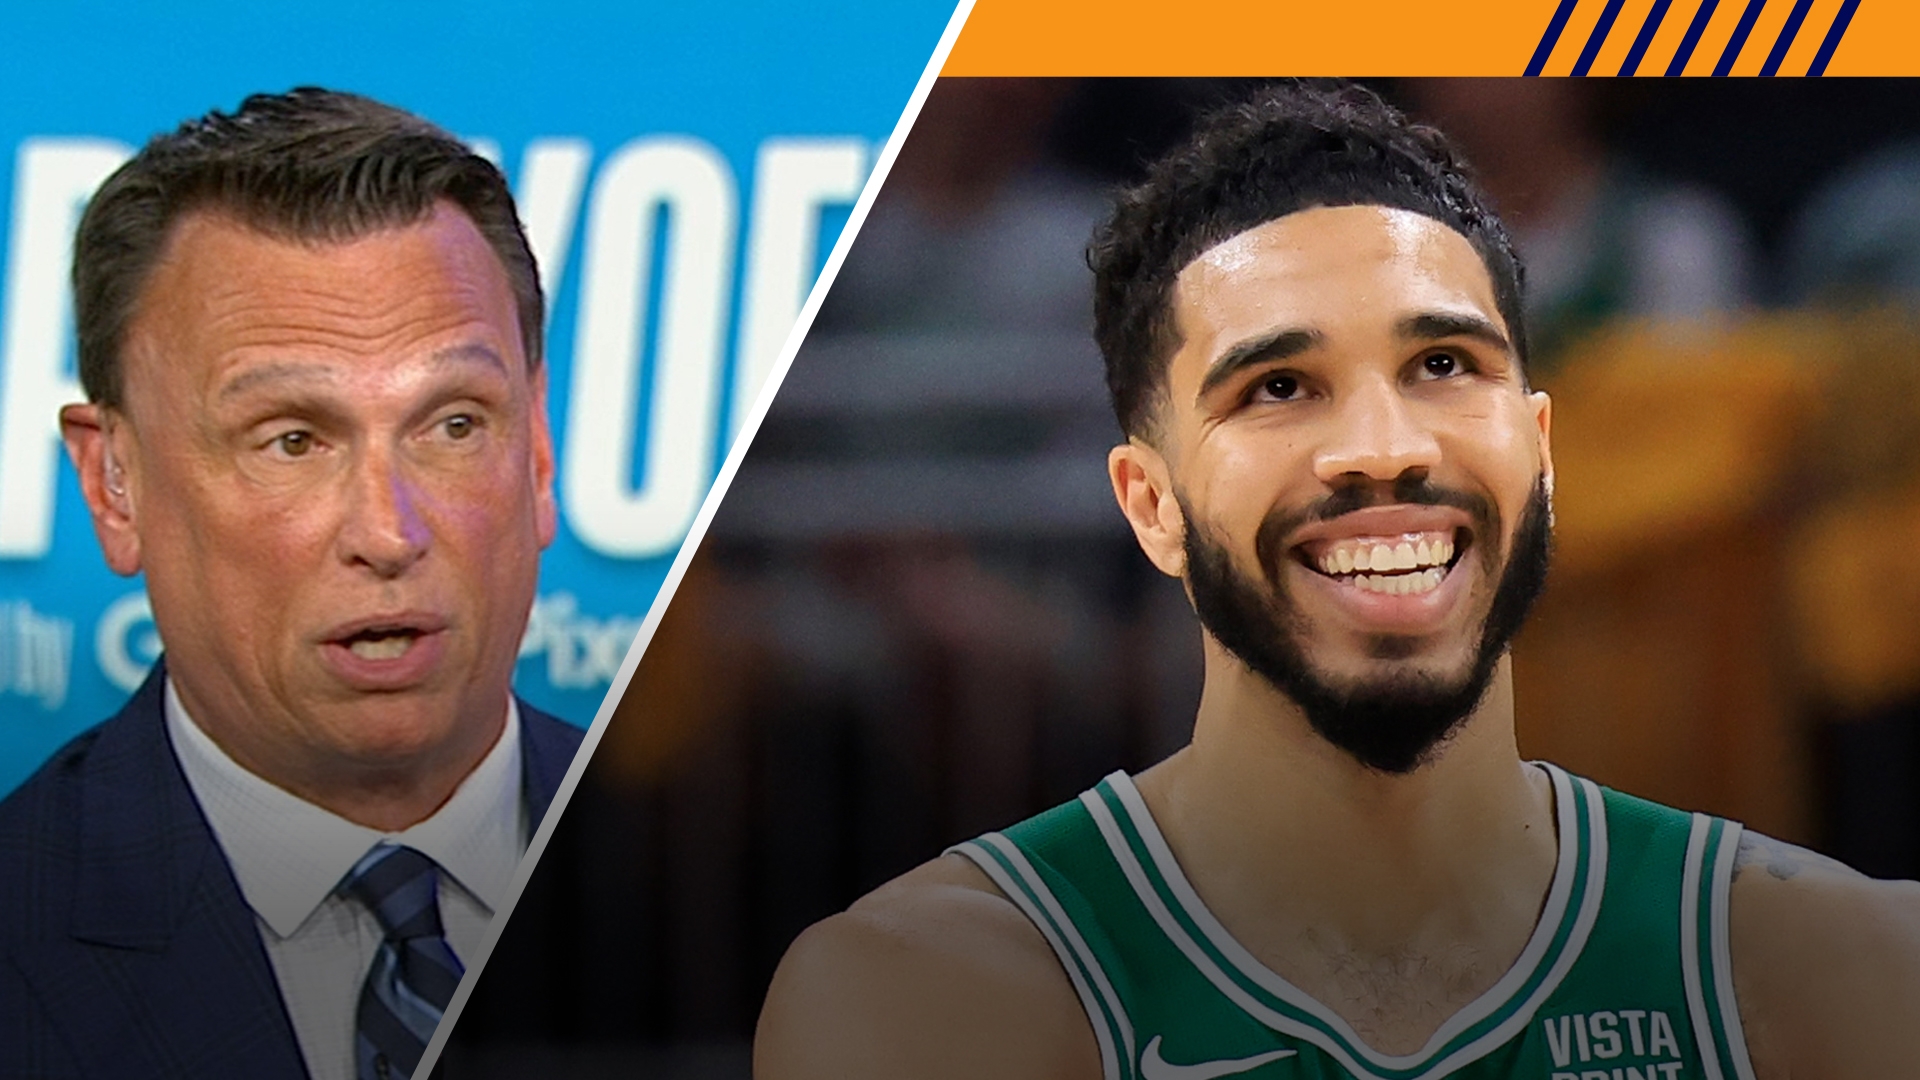 What impressed Legler most about Celtics' sweep of Pacers